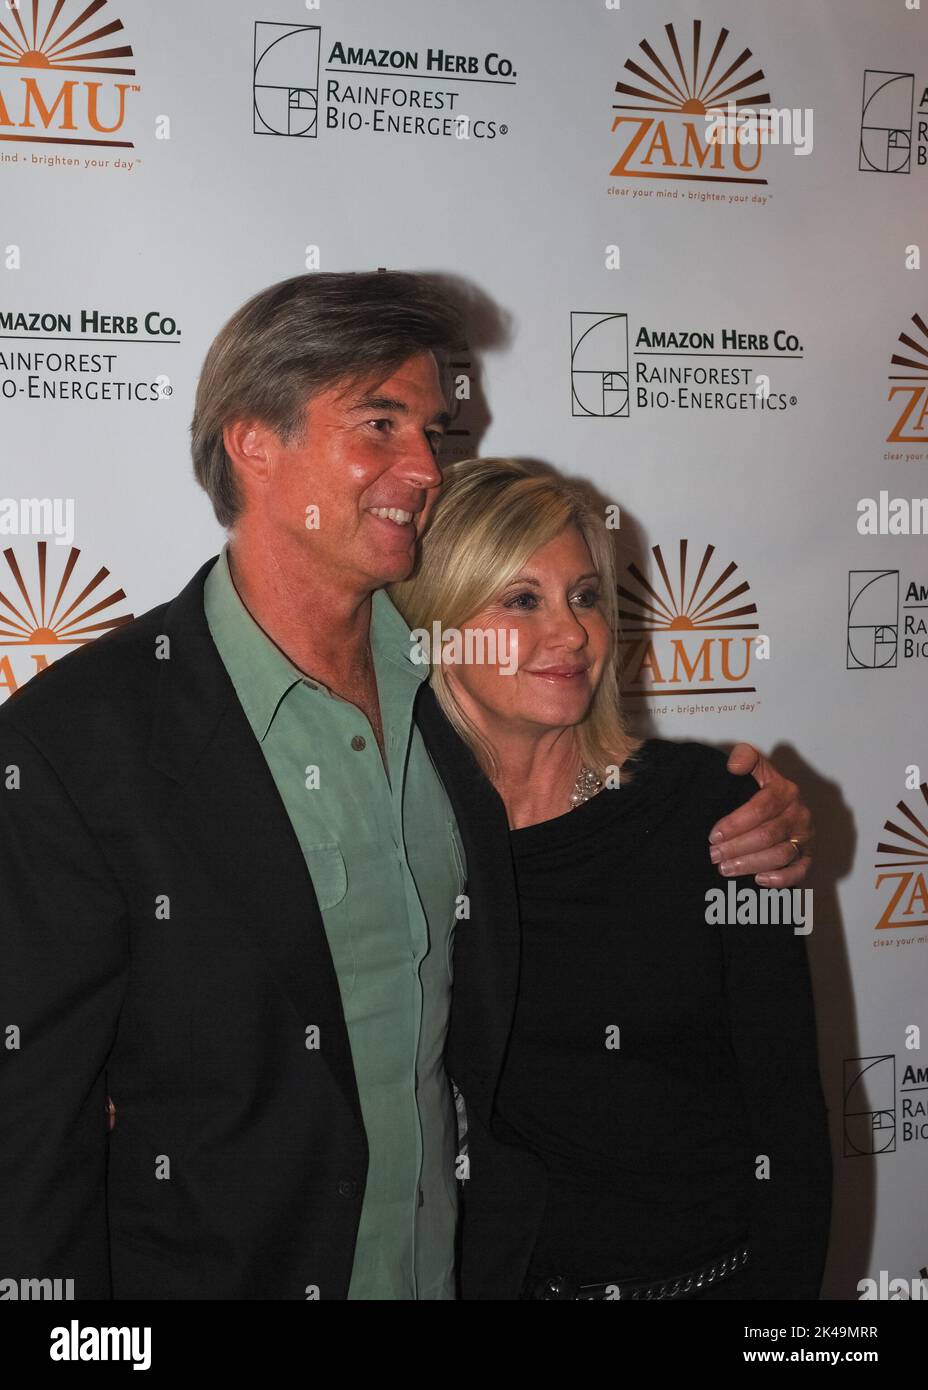 Olivia Newton-John and her husband John Easterling visit a Amazon Herb showcase for the Zamu health drink in Cologne on October 6, 2009 Stock Photo